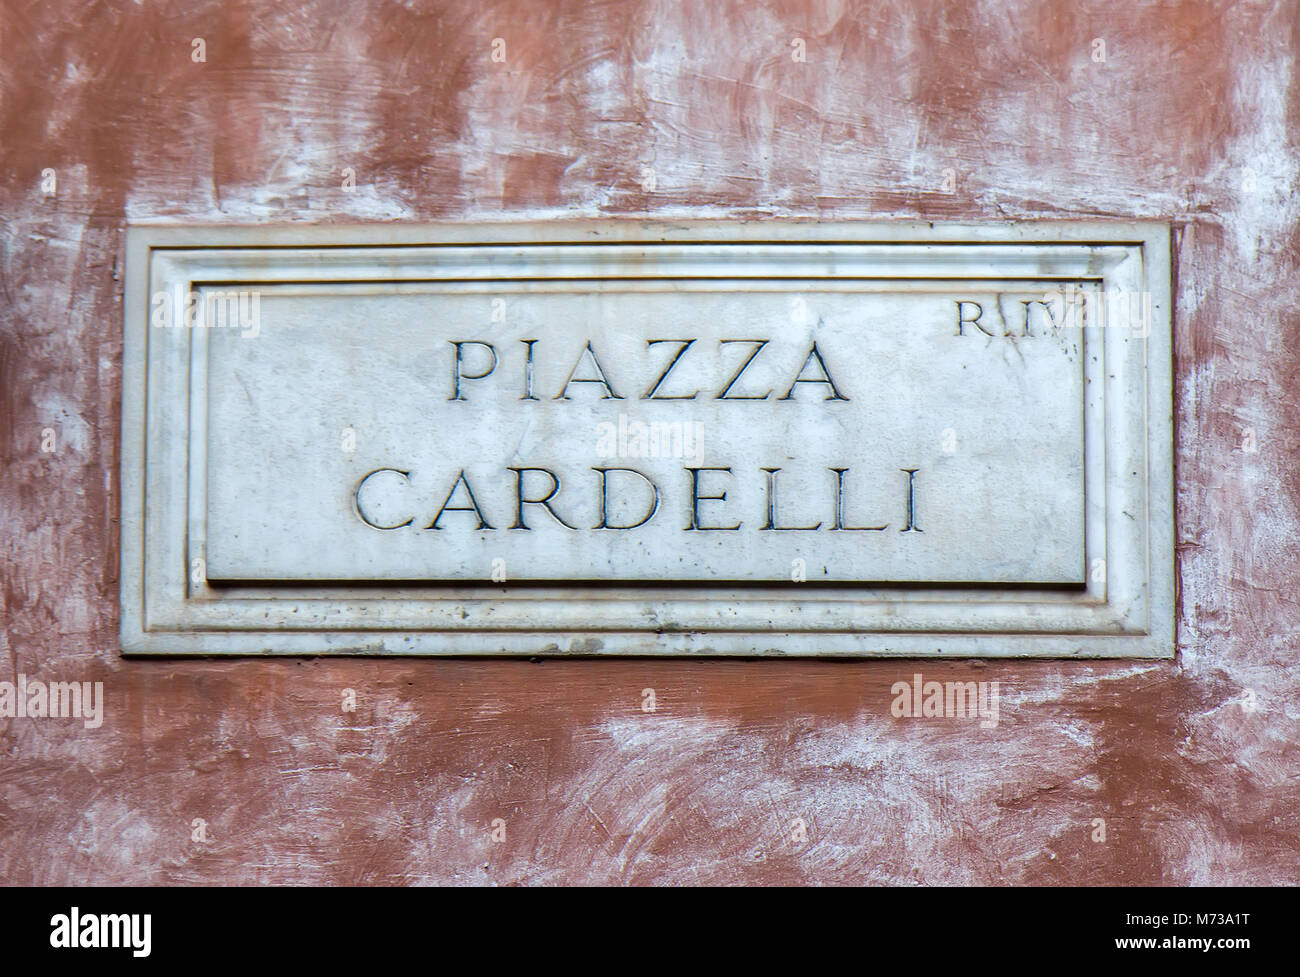 Street sign Piazza Cardelli in Rome, Italy Stock Photo